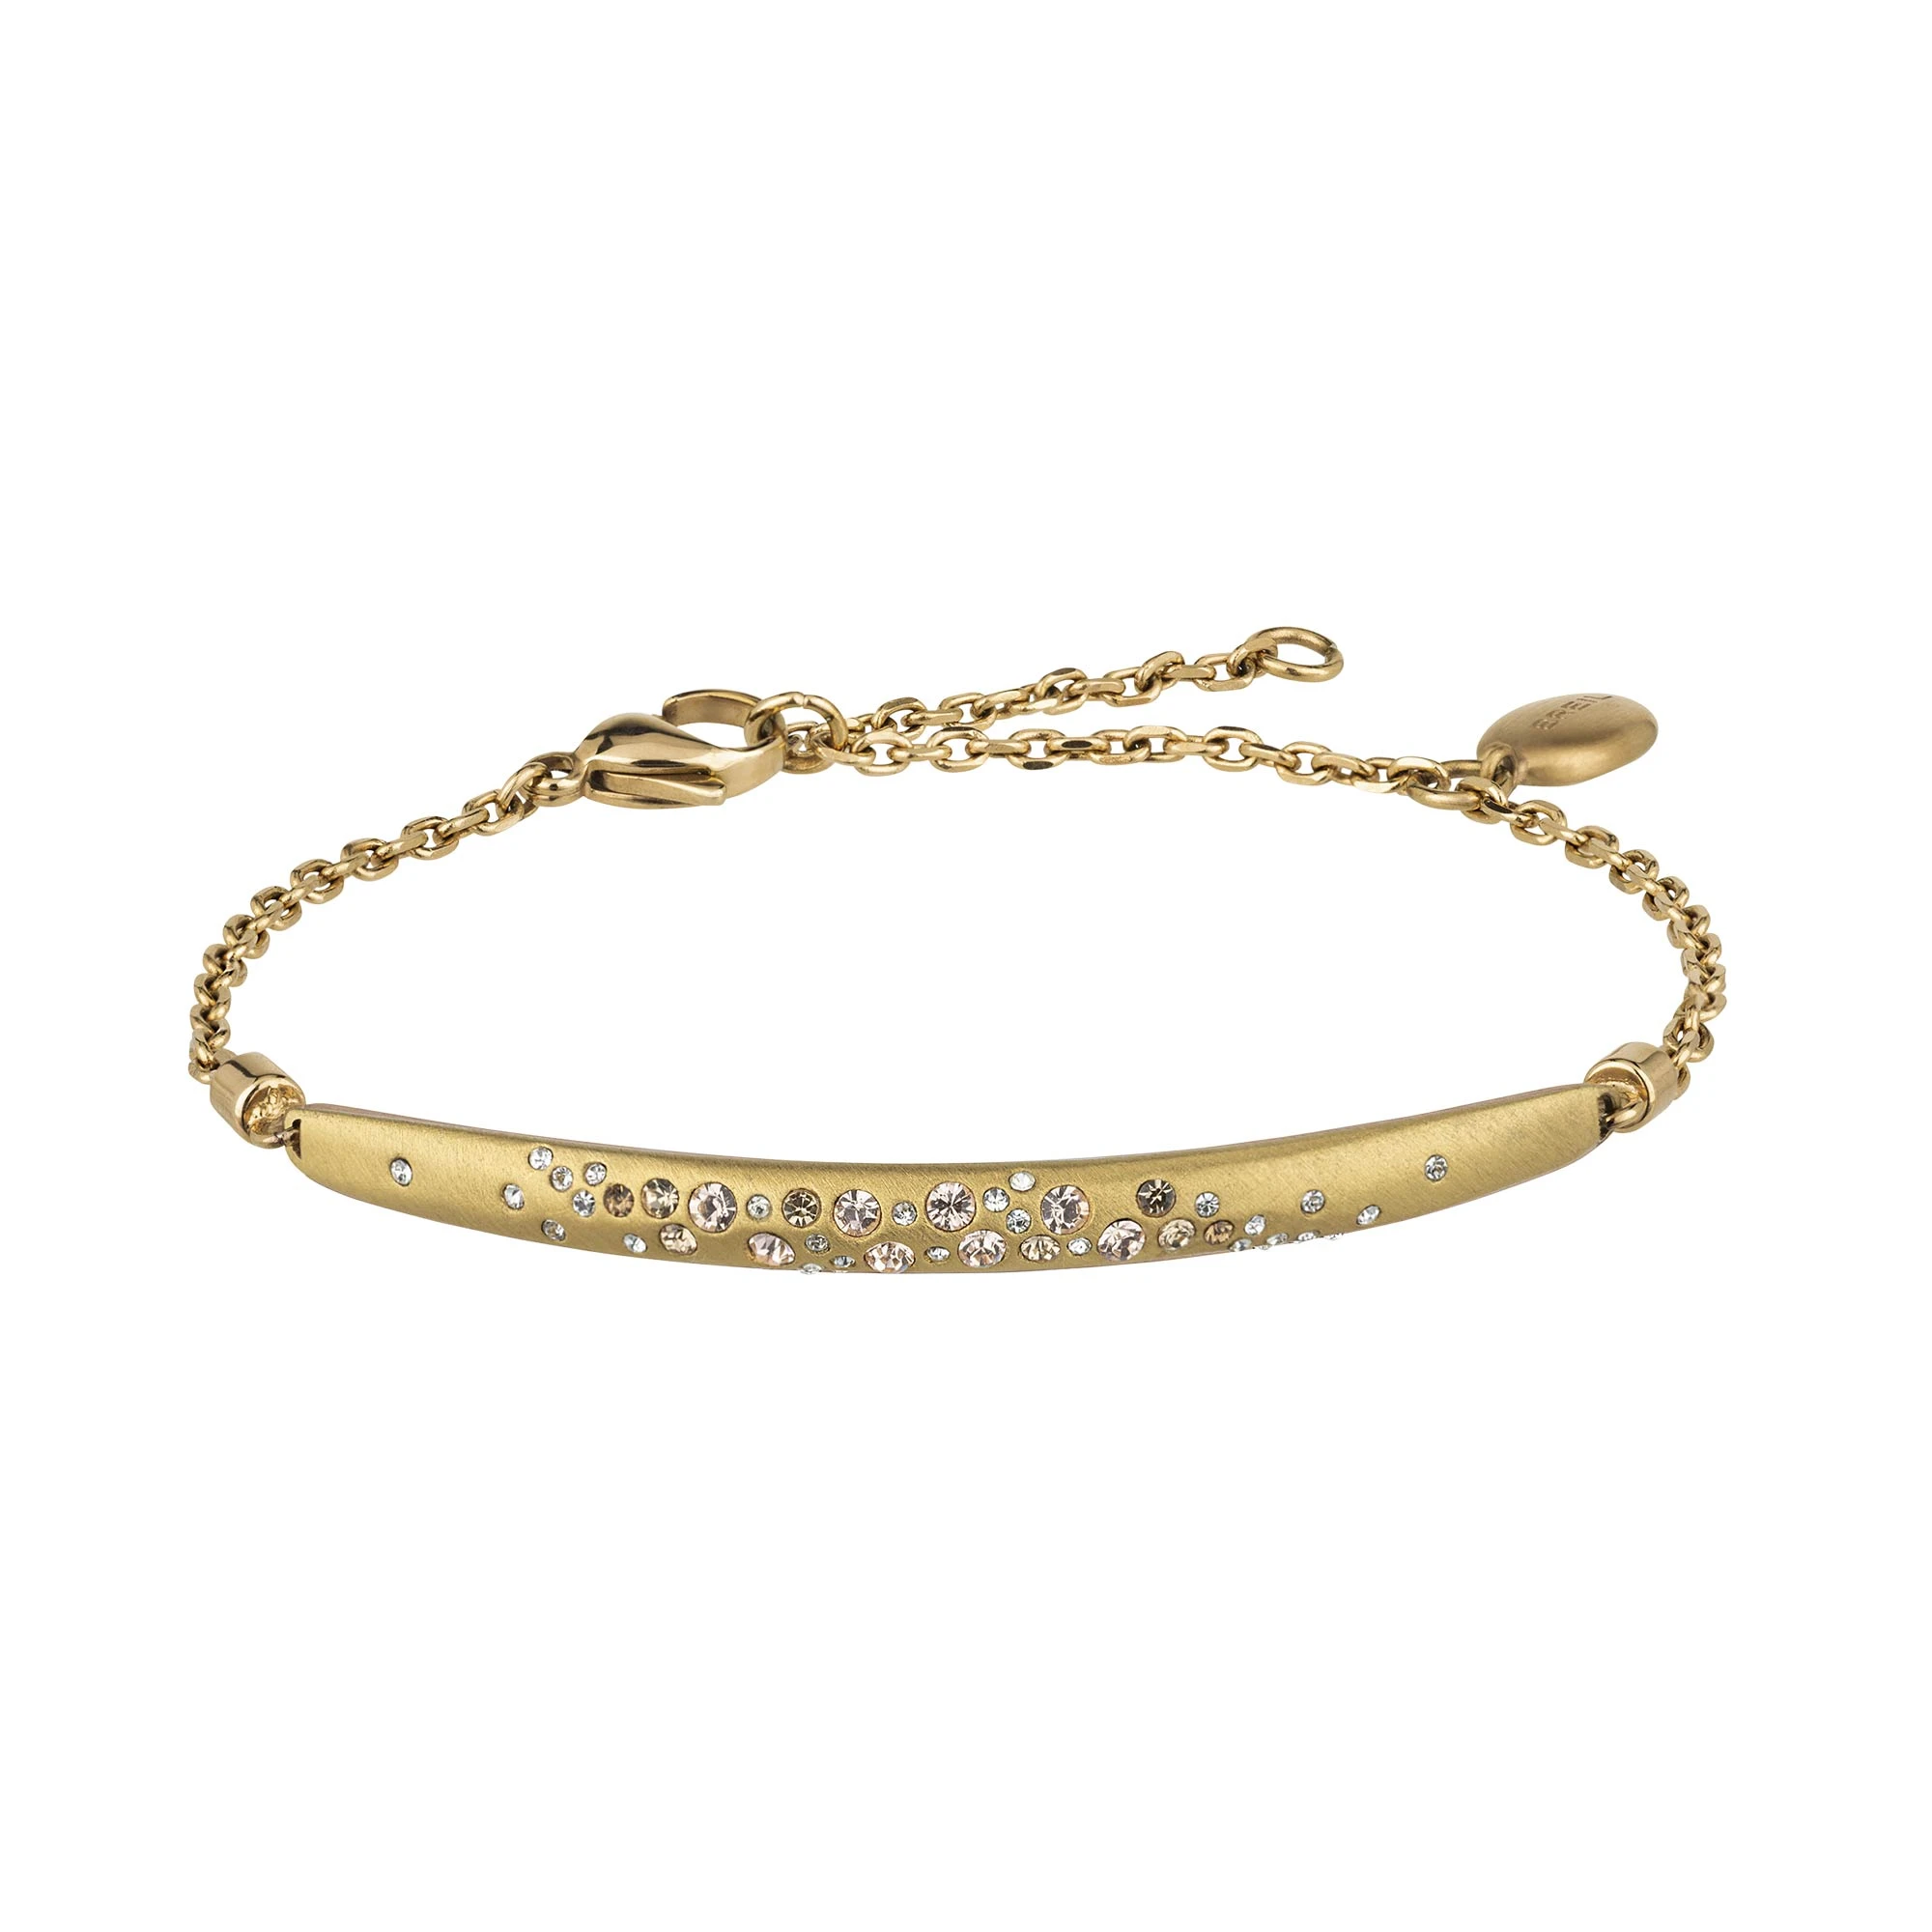 ILLUSION - SATIN IP LIGHT GOLD STAINLESS STEEL BRACELET WITH CRYSTALS - 1 - TJ2656 | Breil